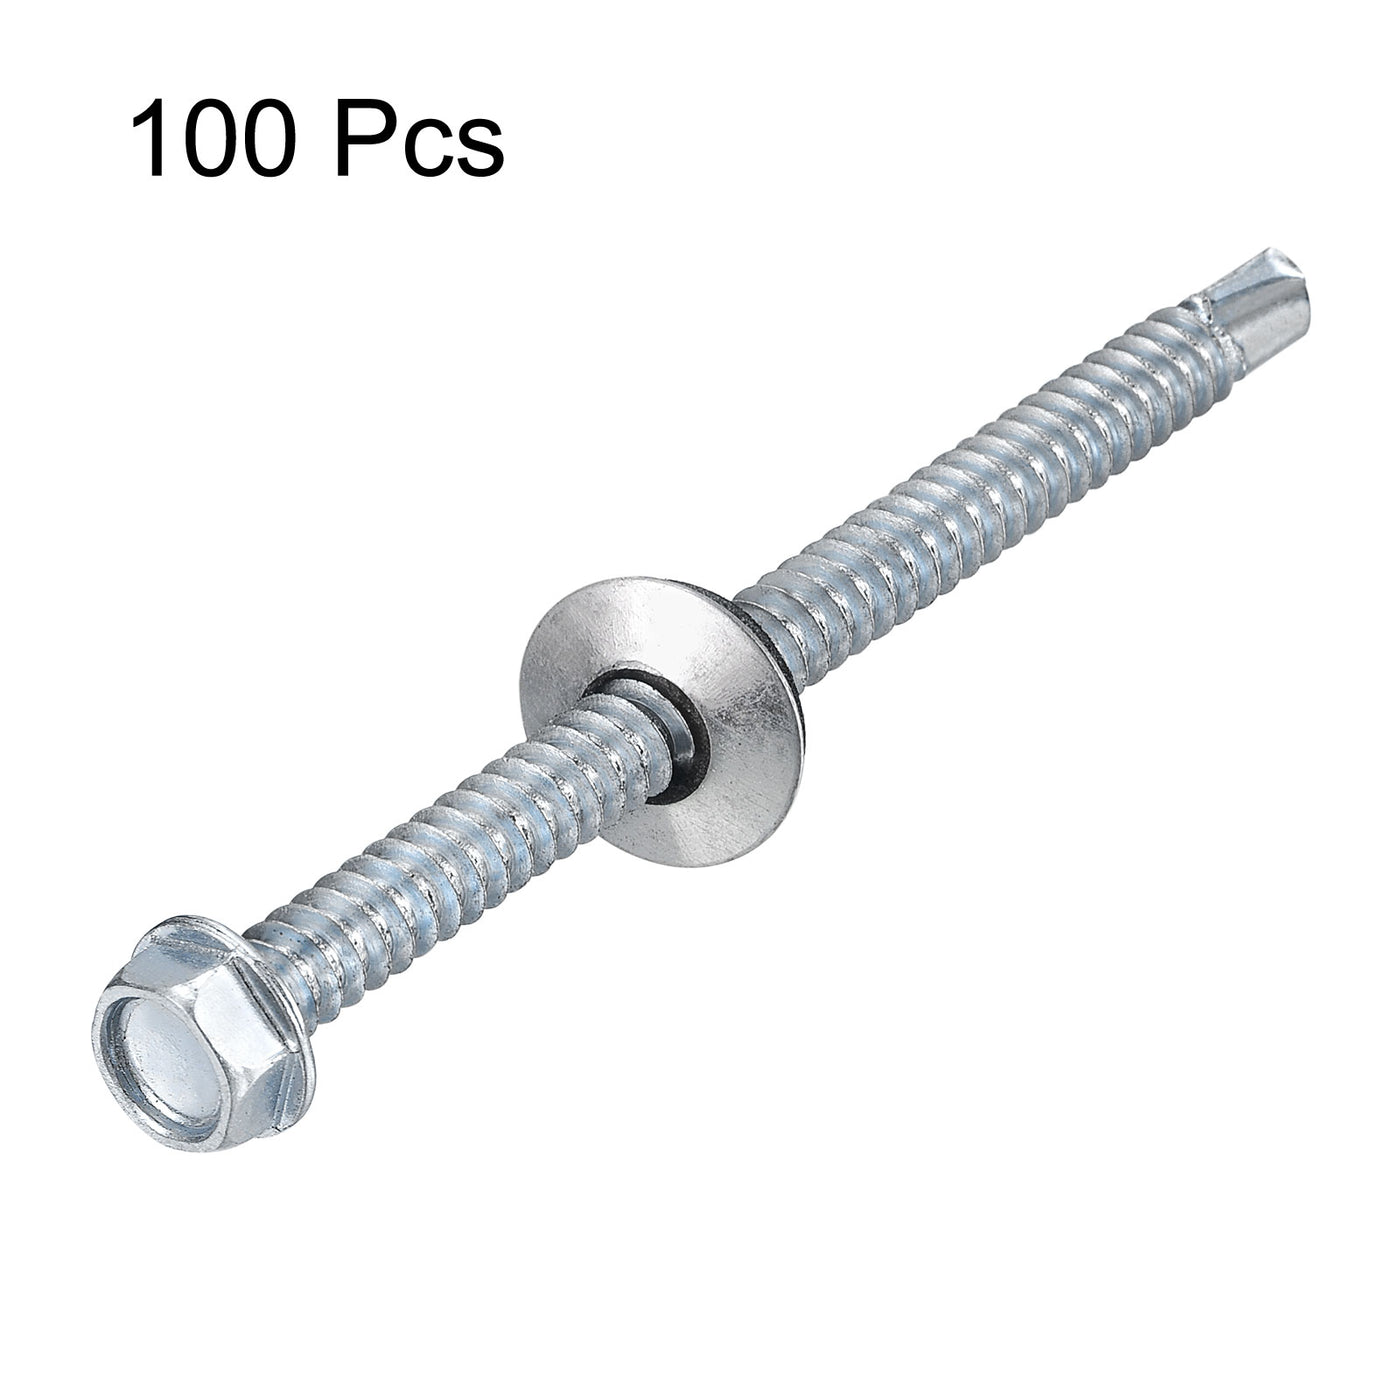 uxcell Uxcell #14 x 3-9/16" Self Drilling Screws, 100pcs Roofing Screws with EPDM Washer